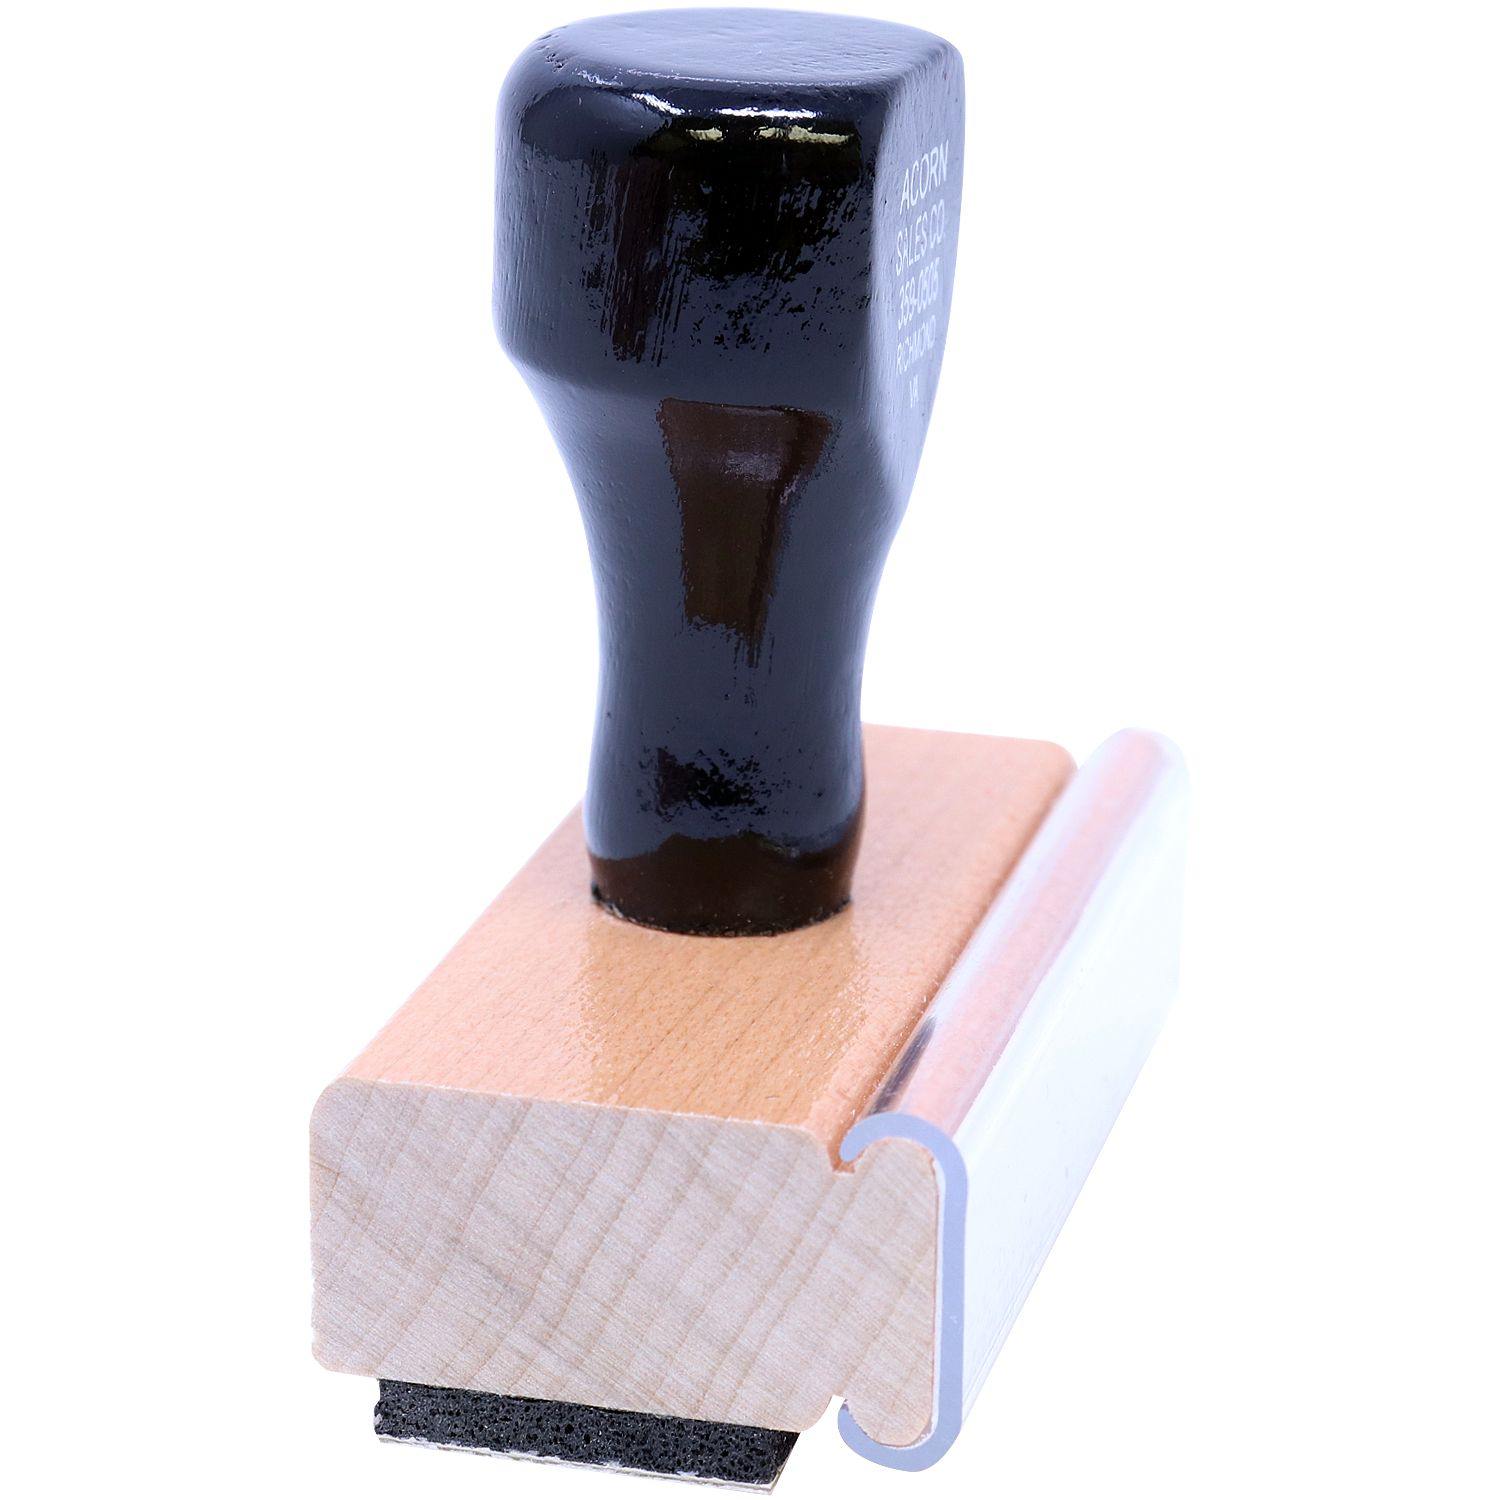 Renewed Rubber Stamp - Engineer Seal Stamps - Brand_Acorn, Impression Size_Small, Stamp Type_Regular Stamp, Type of Use_Office